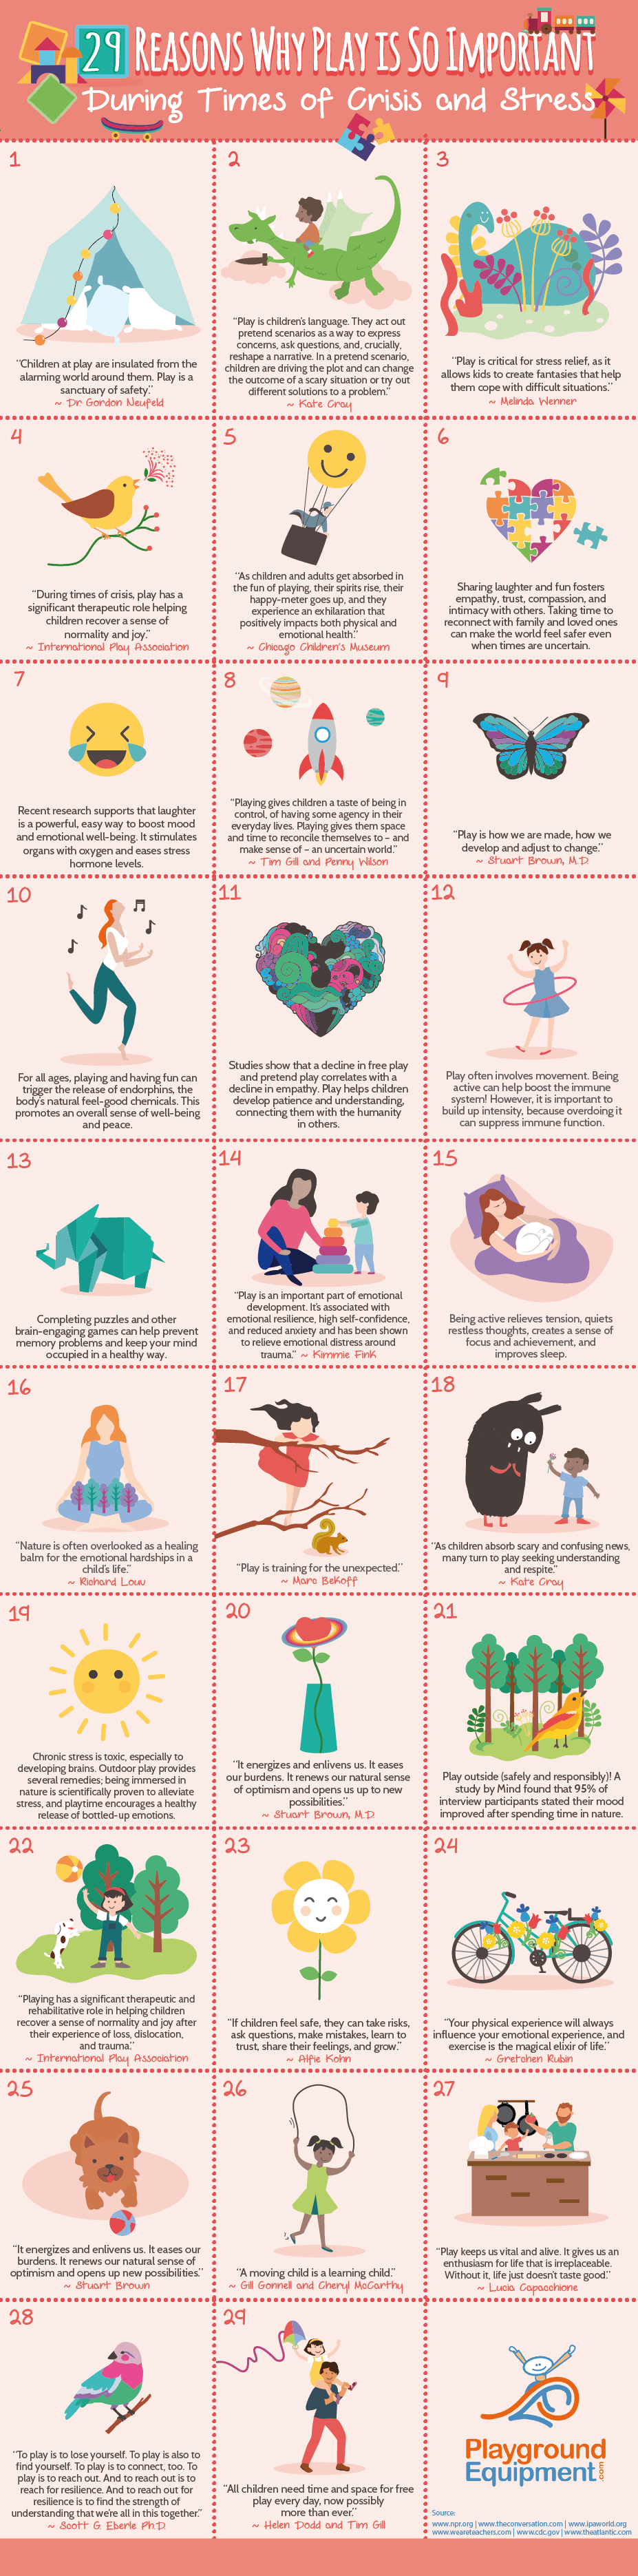 29 Reasons Why Play is So Important for Children During Times of Crisis